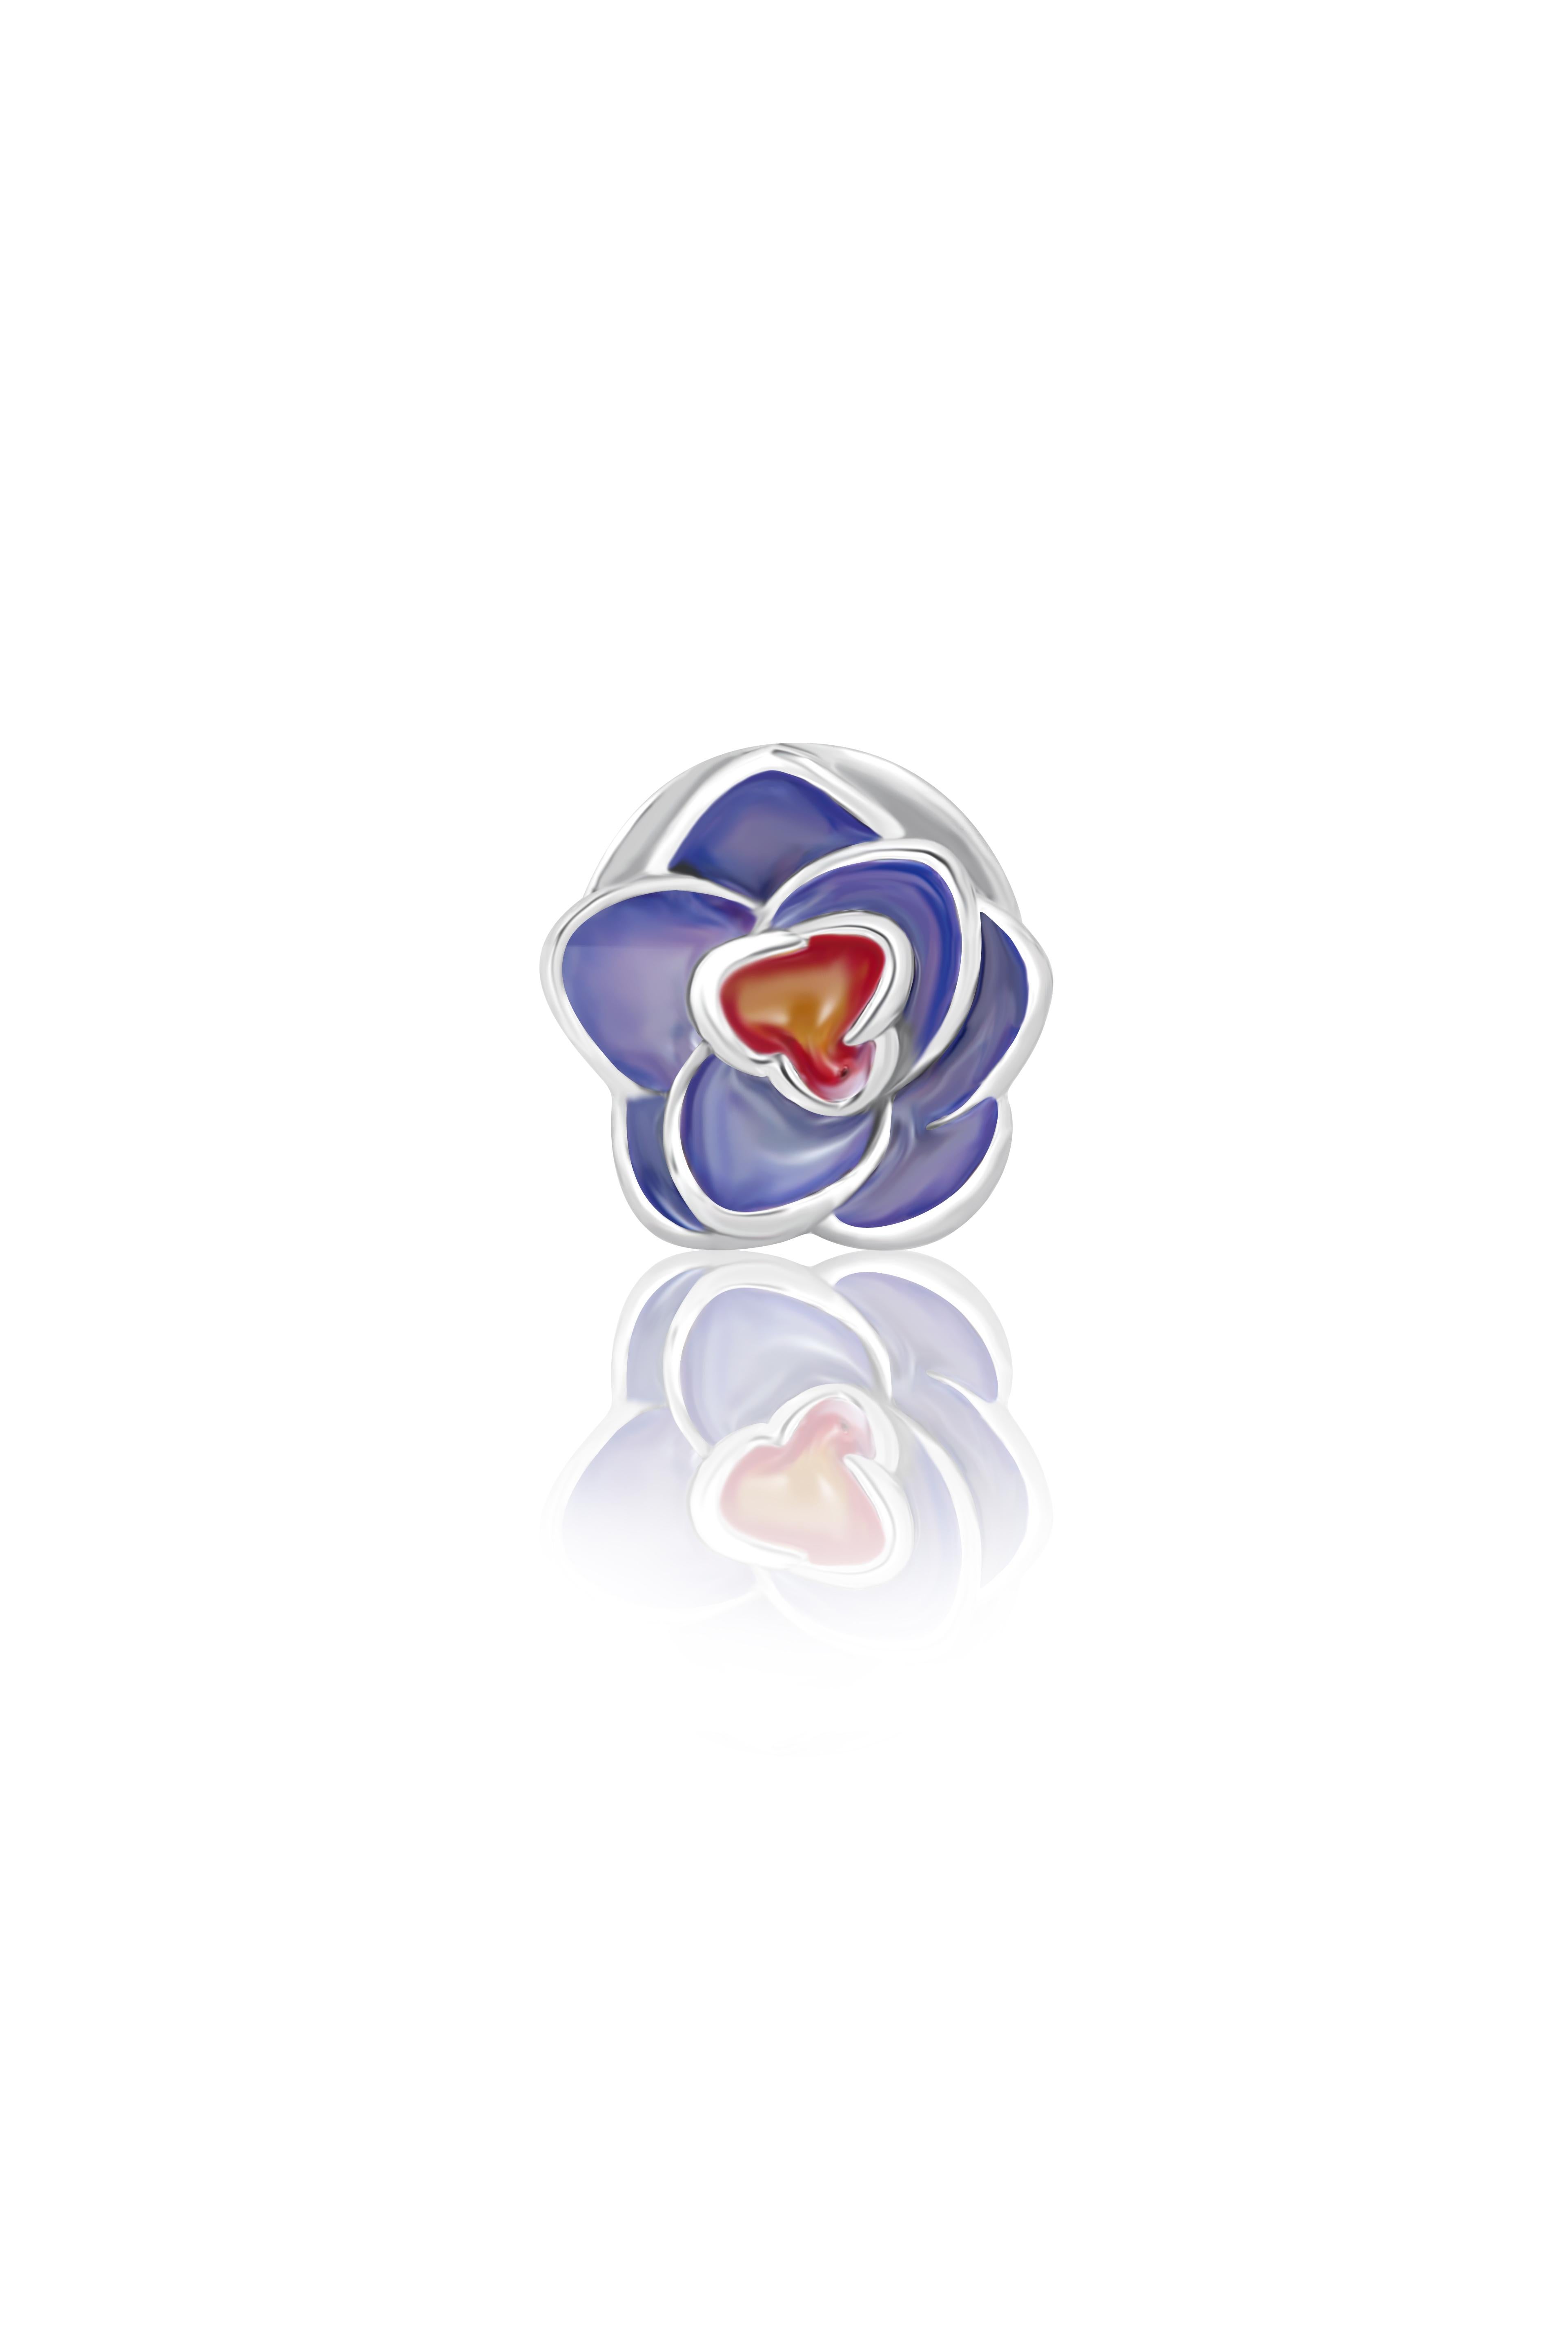 Modern Hand painted Flower Cufflinks in enameled Sterling Silver by Fils Unique